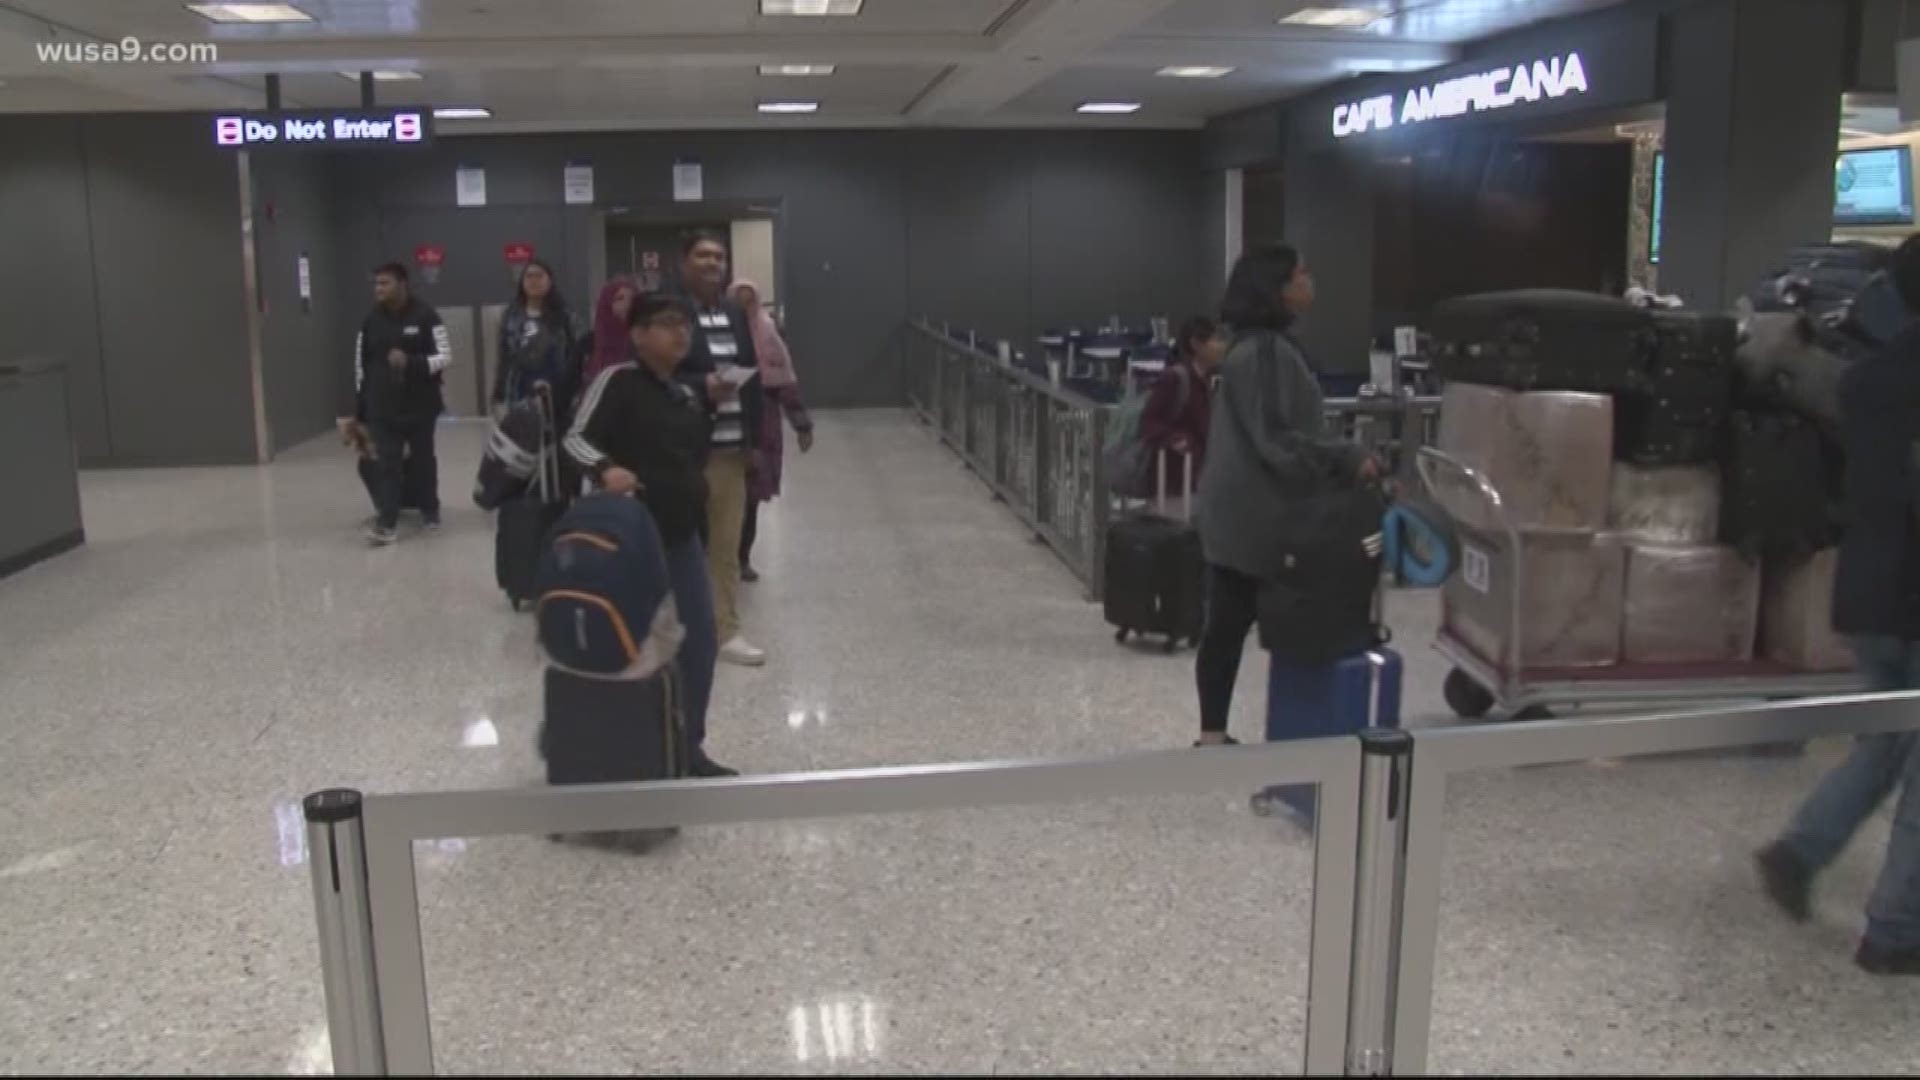 Airline workers reached out to WUSA9 about their concerns. They want changes to air travel during this global pandemic.